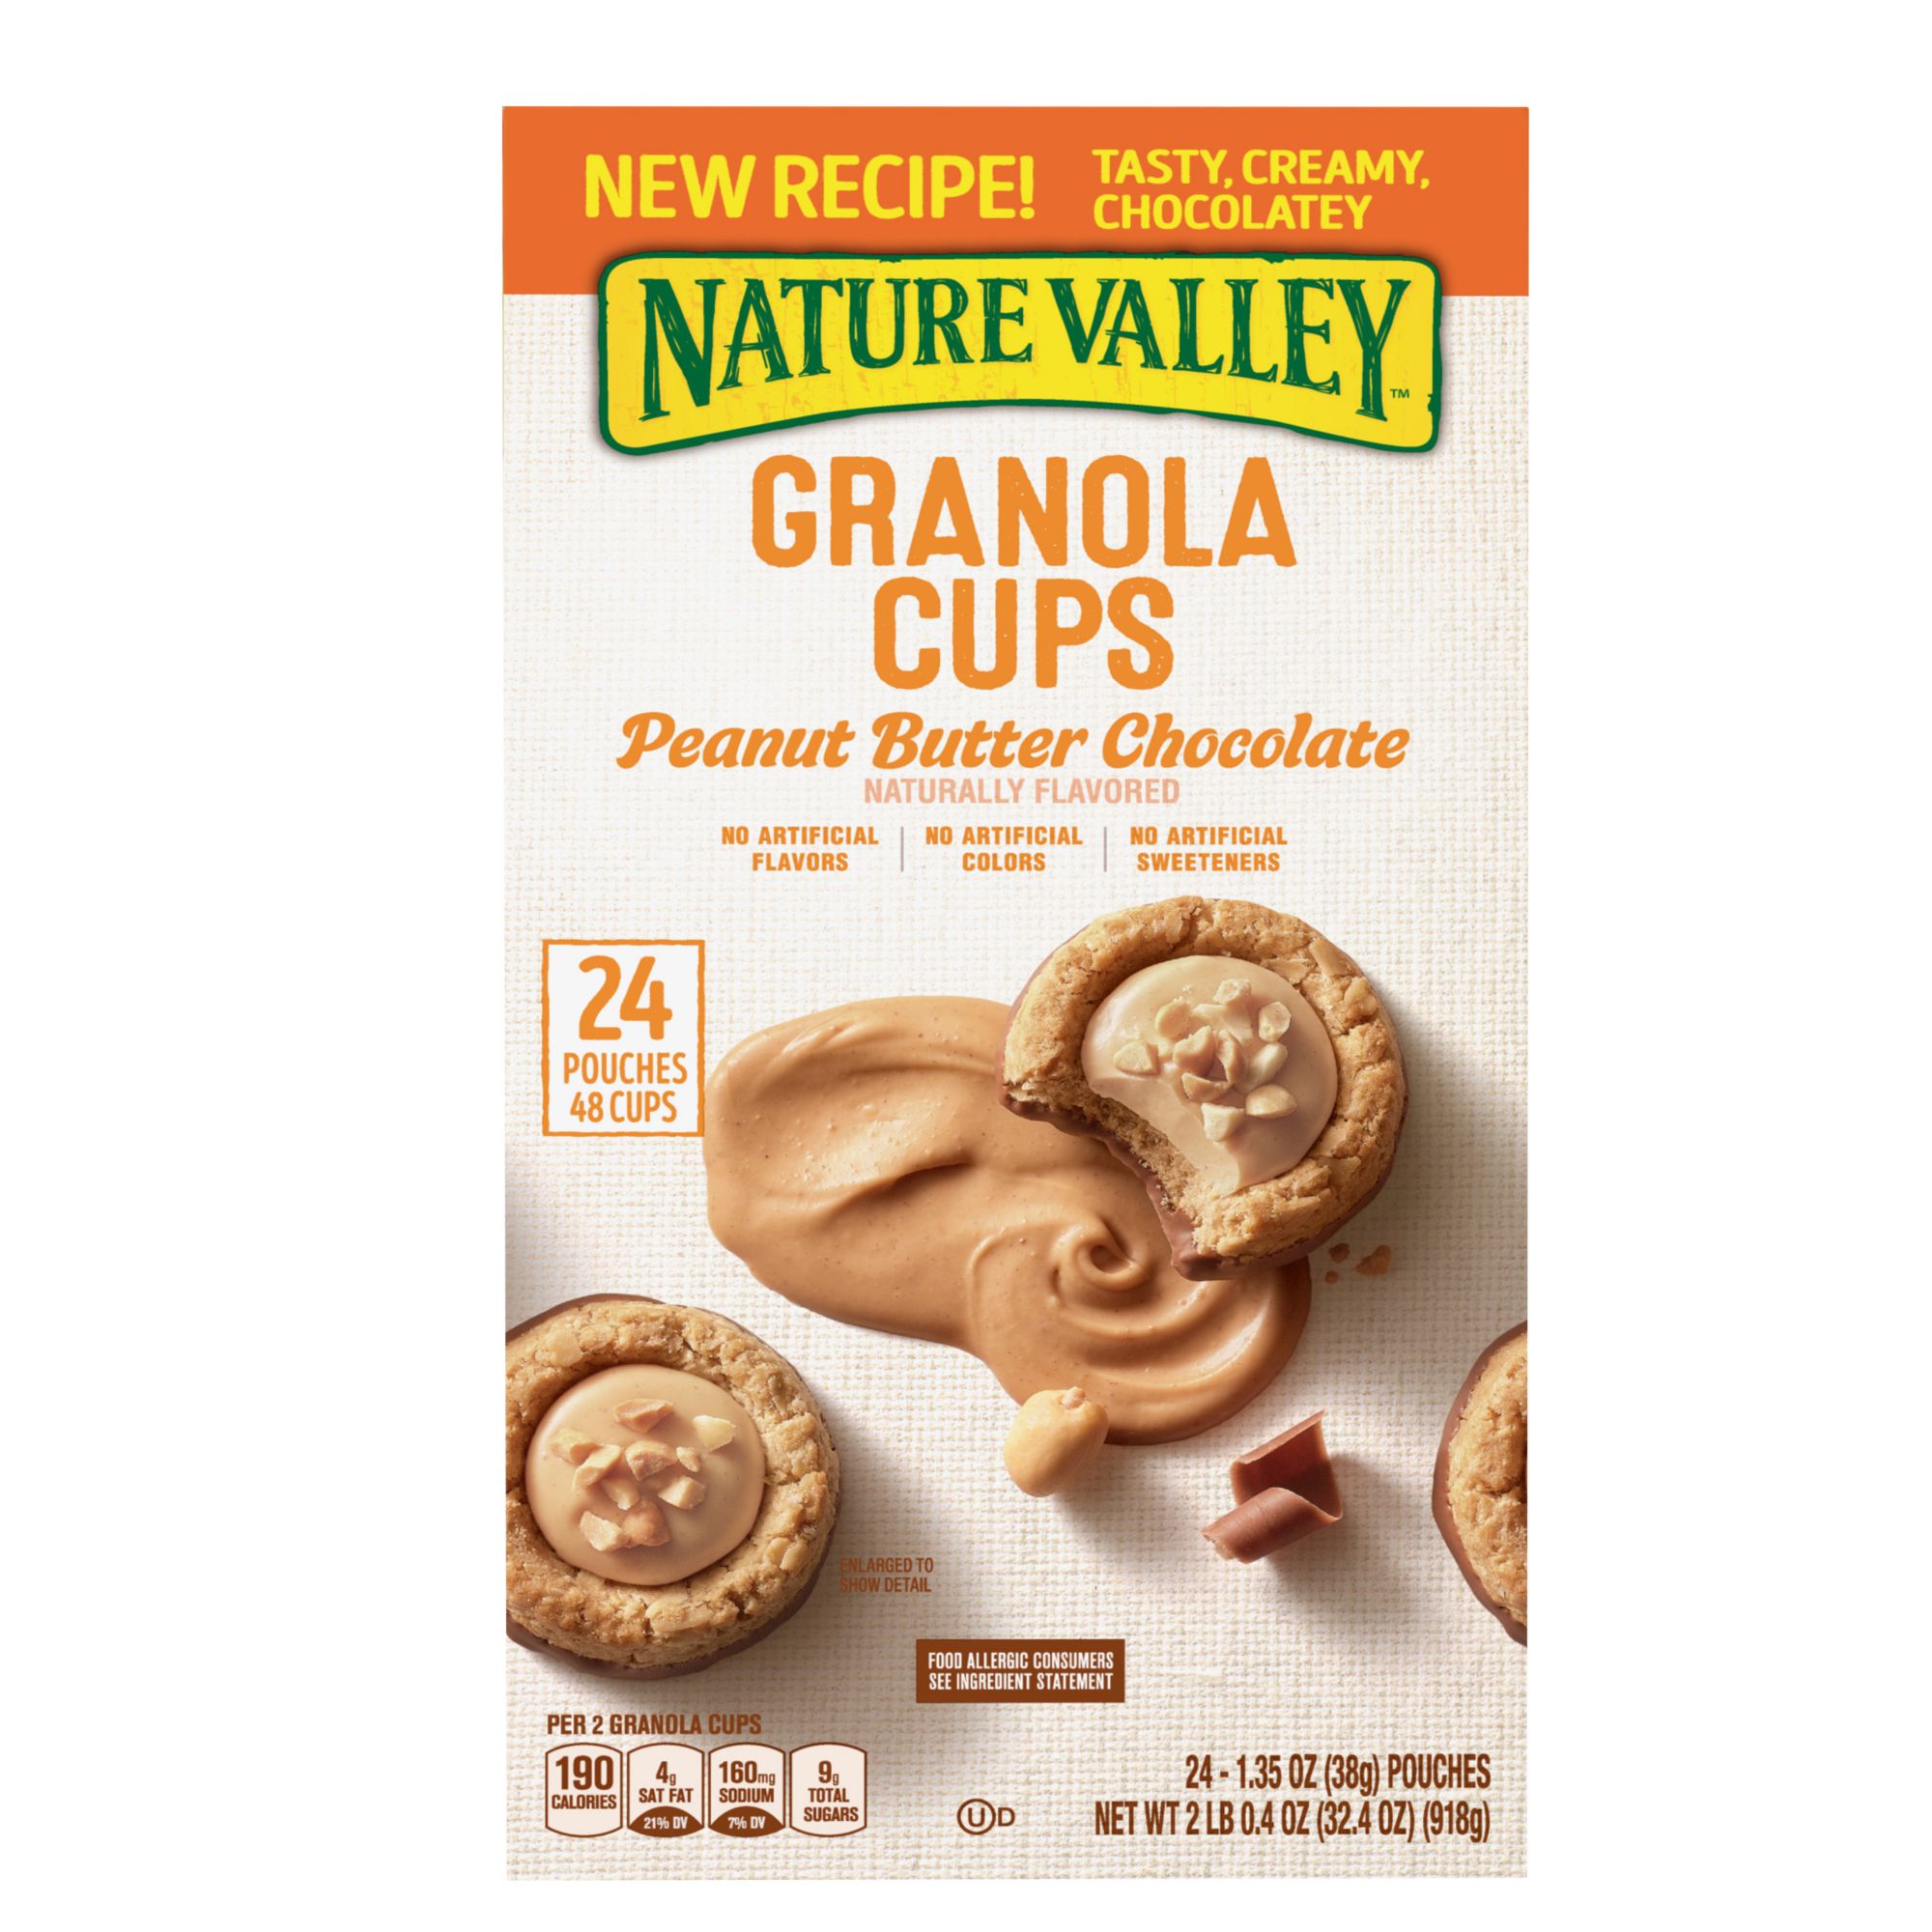 Nature Valley Peanut Butter Chocolate Granola Cups, 24 ct. BJs WholeSale Club